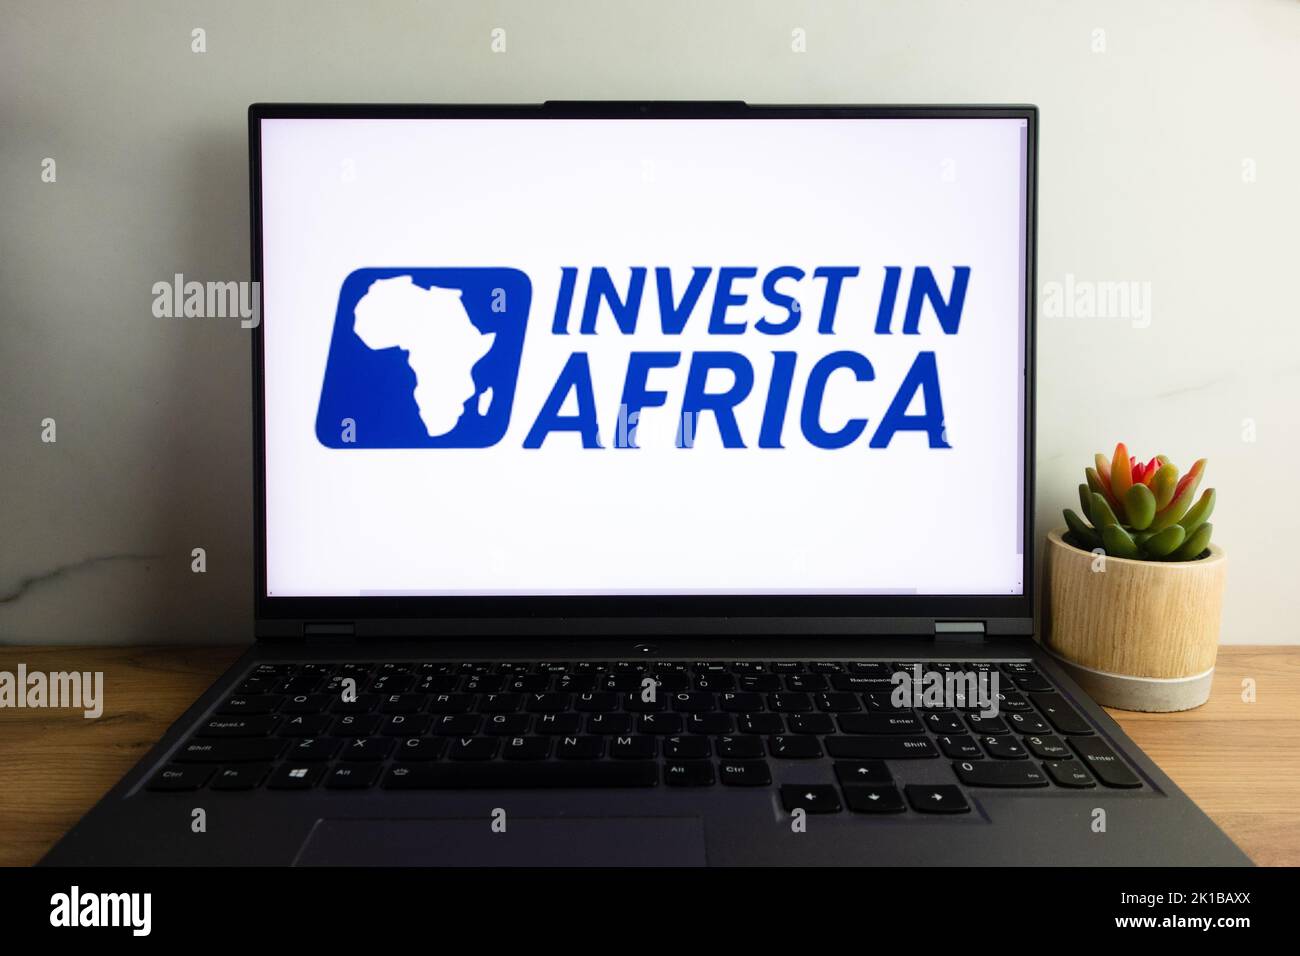 KONSKIE, POLAND - September 12, 2022: Invest in Africa logo displayed on laptop computer screen Stock Photo